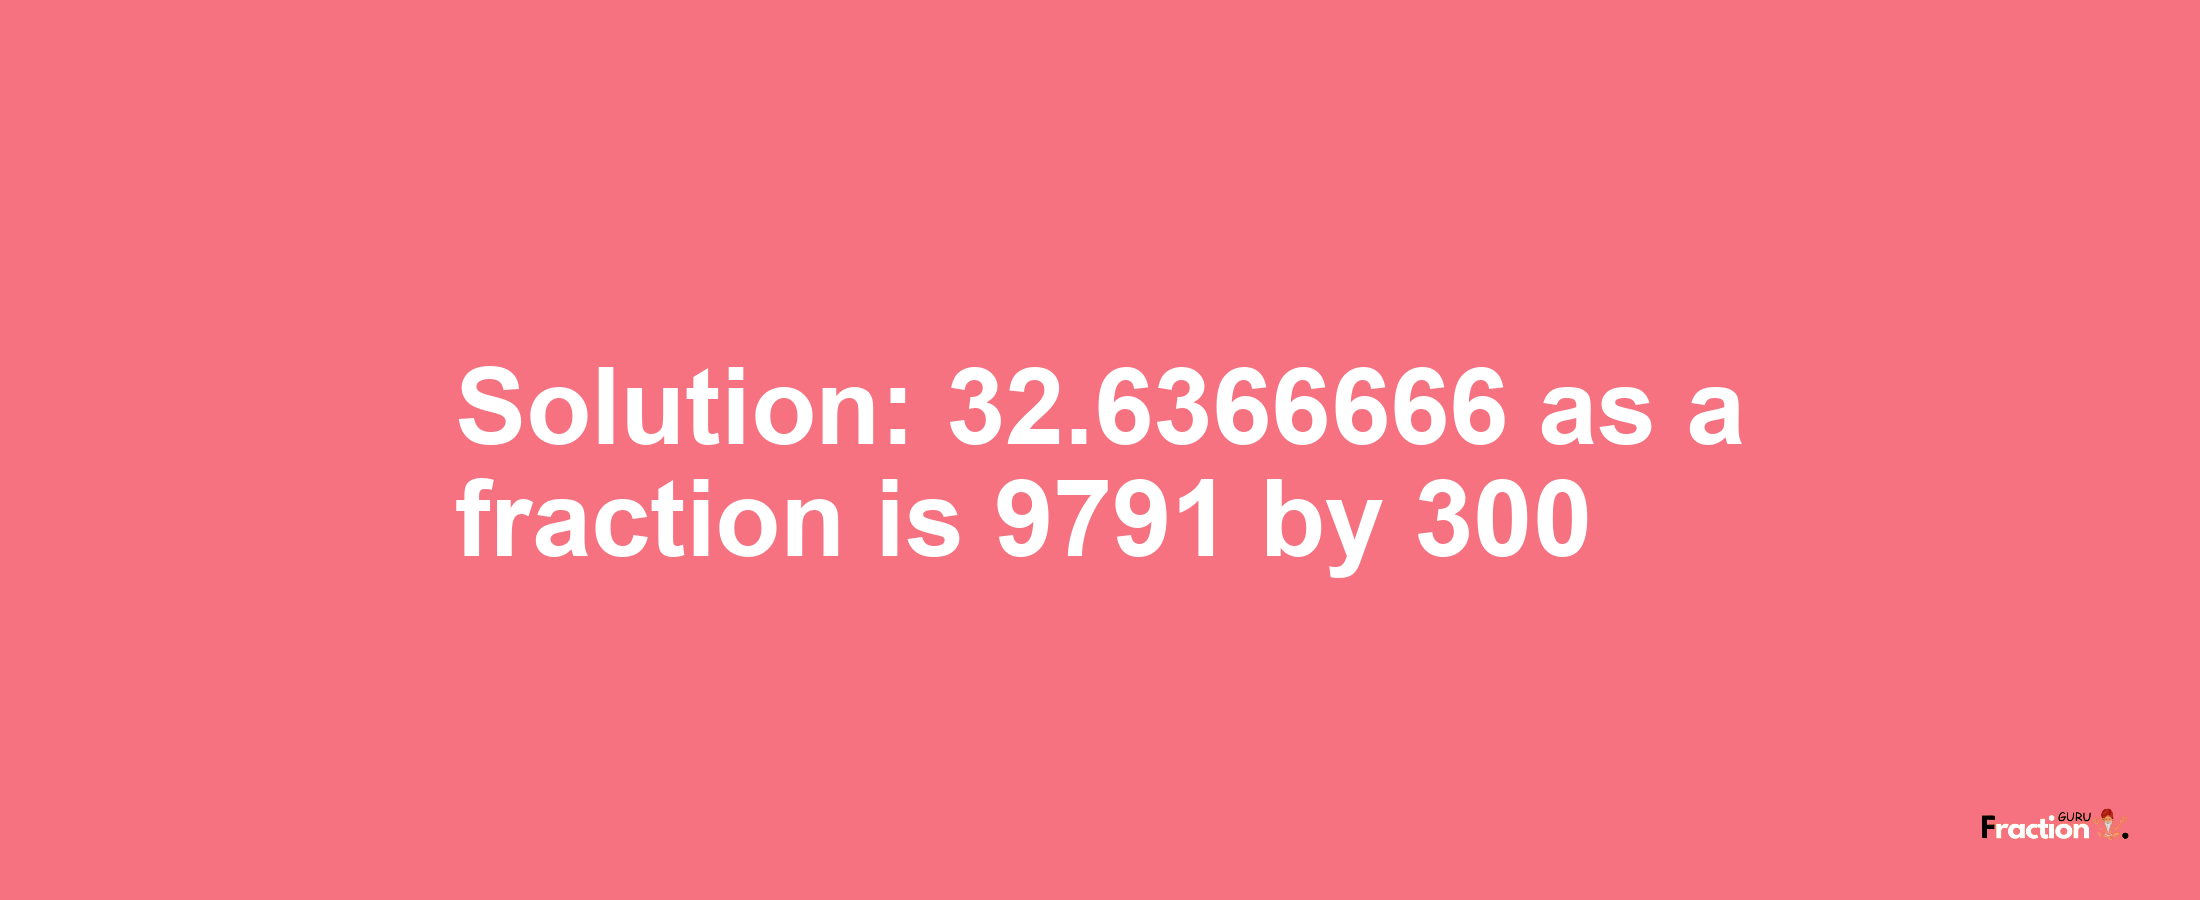 Solution:32.6366666 as a fraction is 9791/300